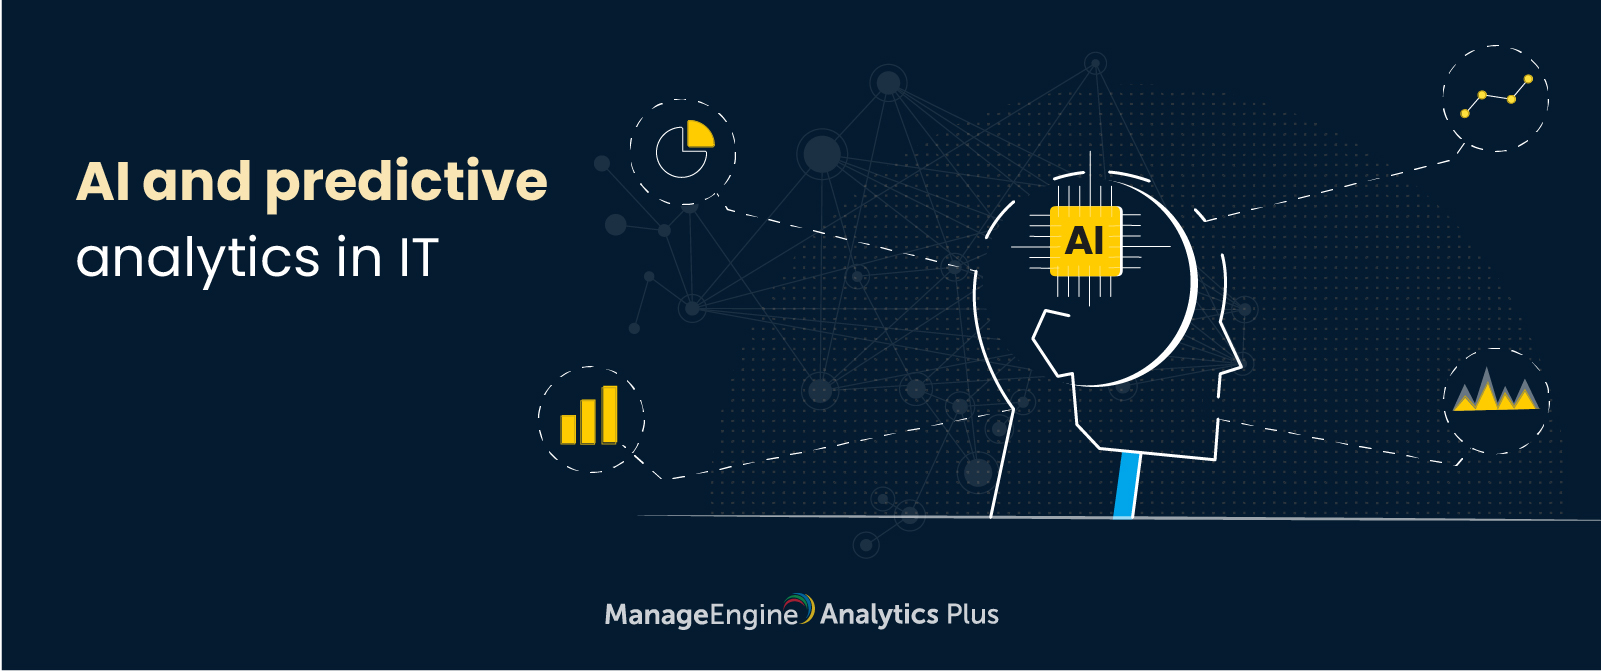 Leverage AI and predictive analysis to cut costs and eliminate downtime